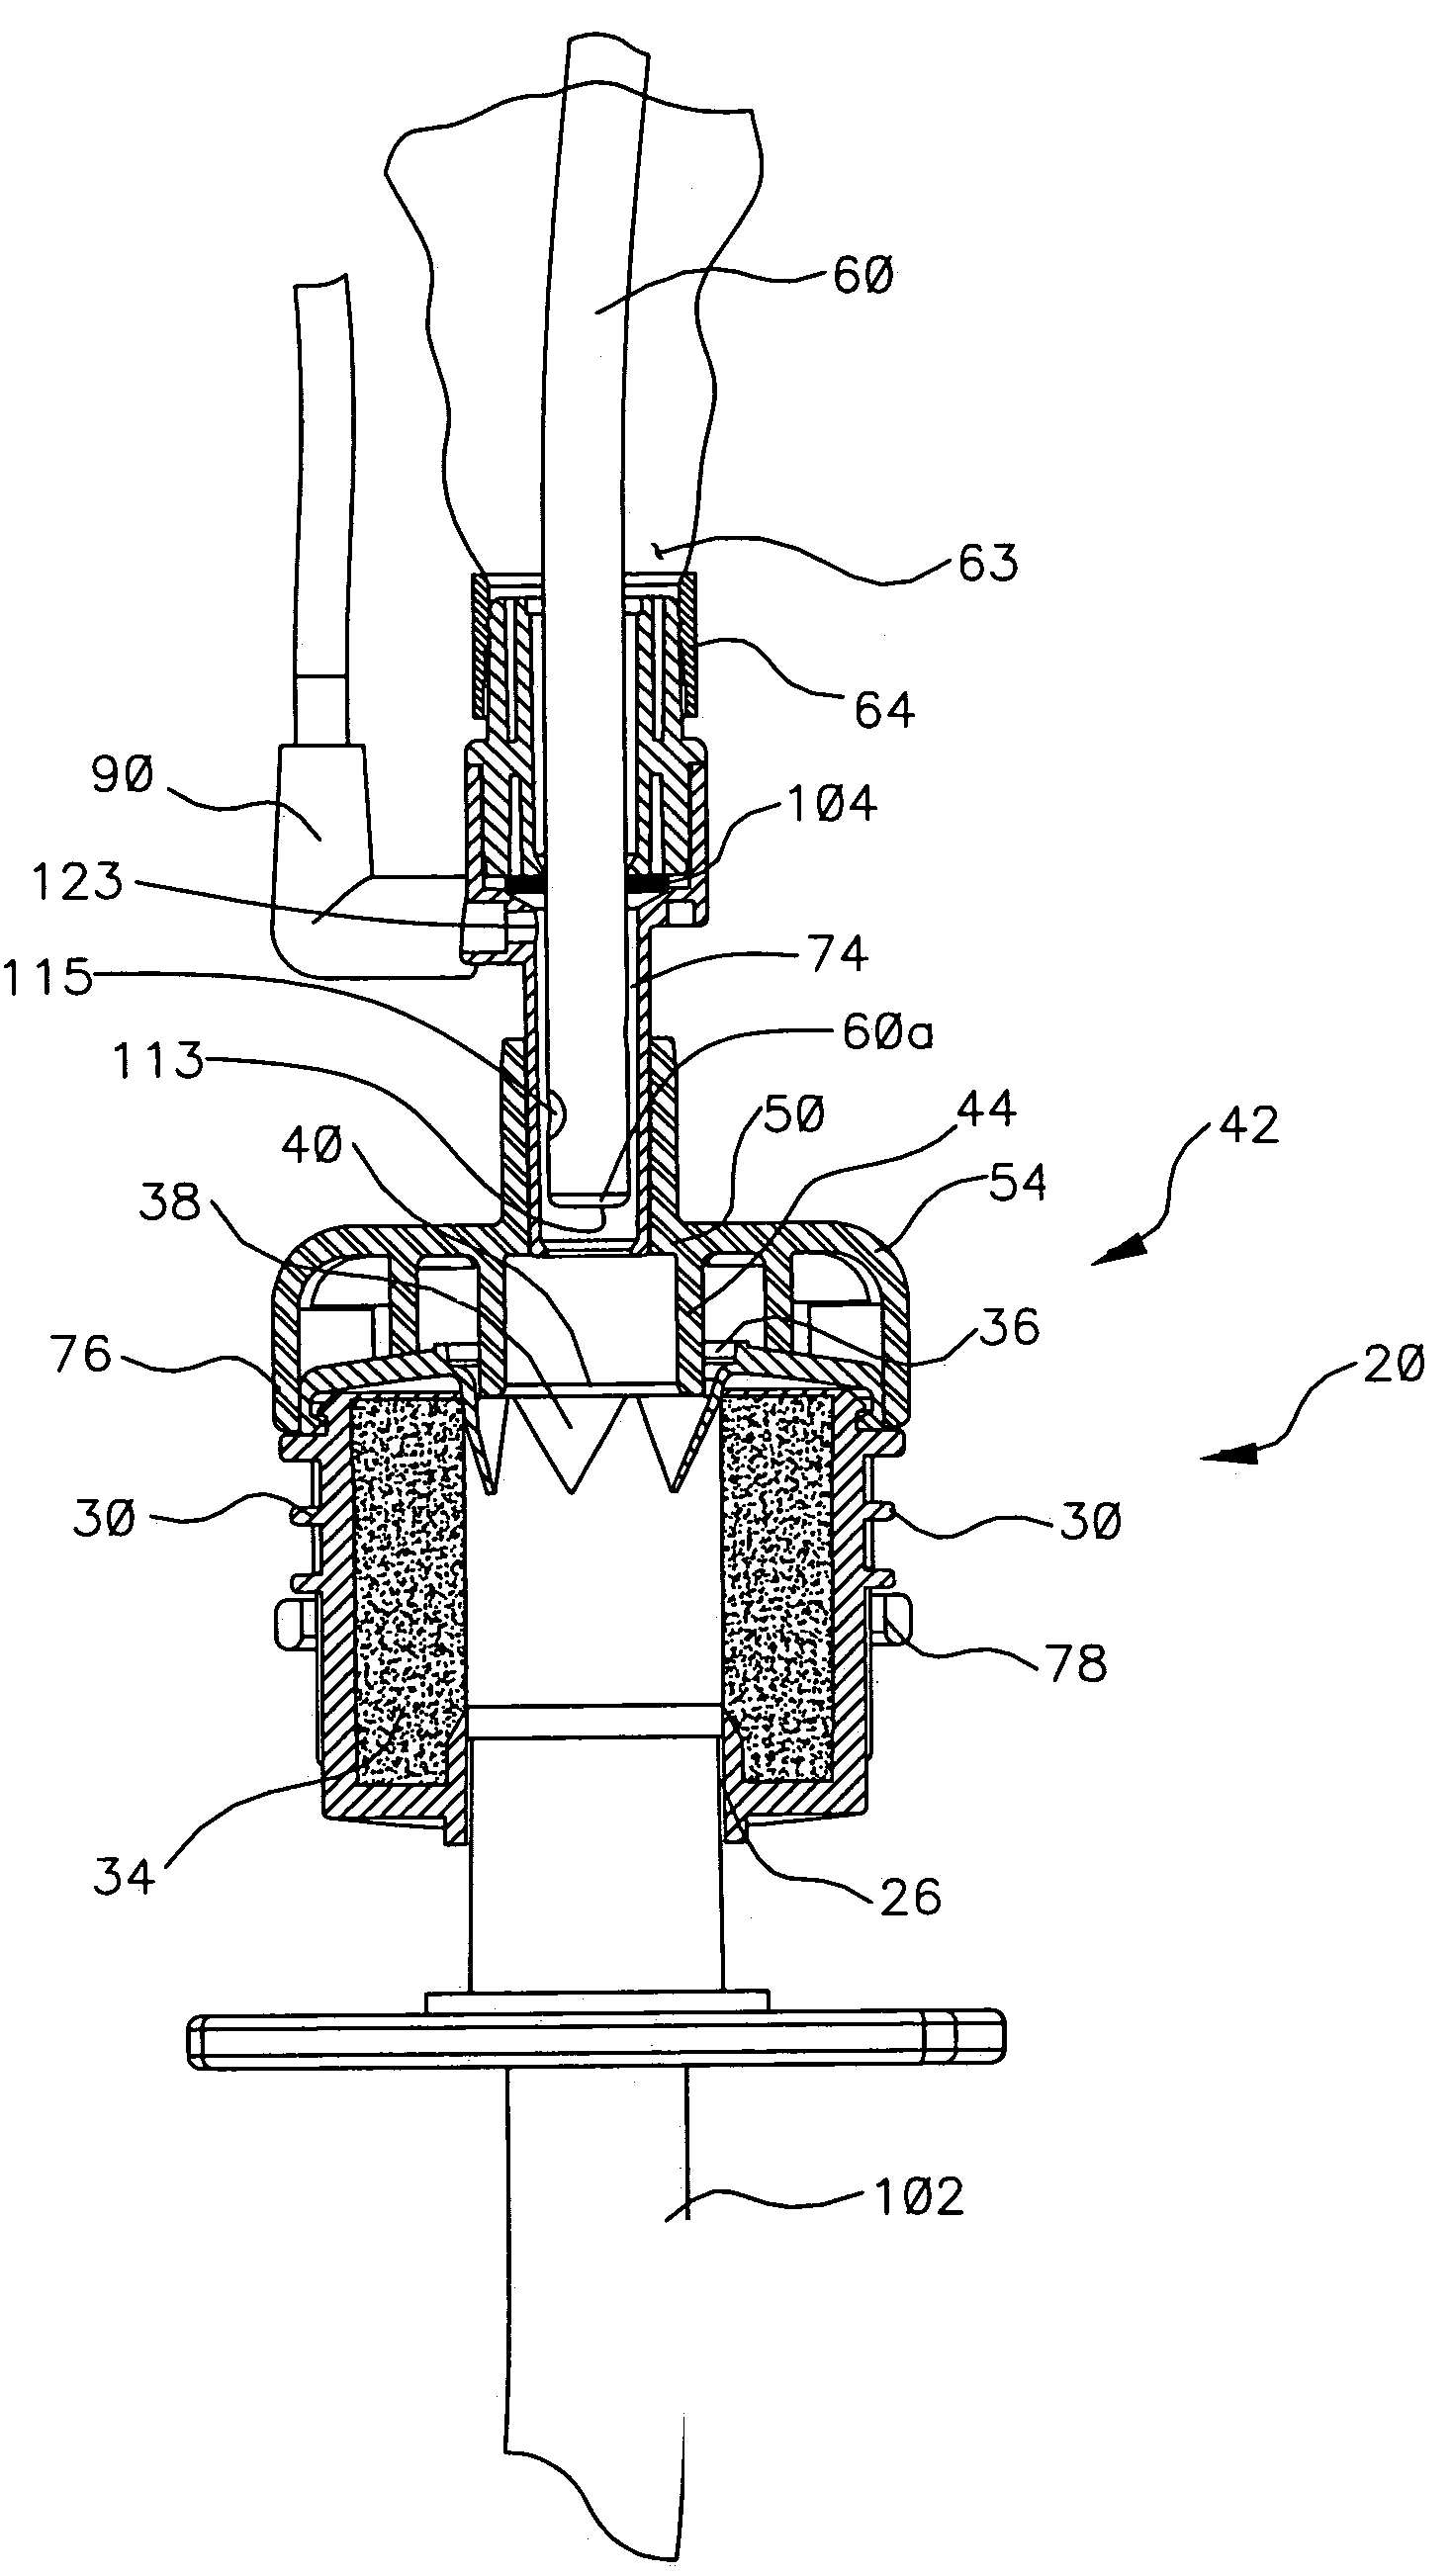 Heat and moisture exchanger adaptor for closed suction catheter assembly and system containing the same